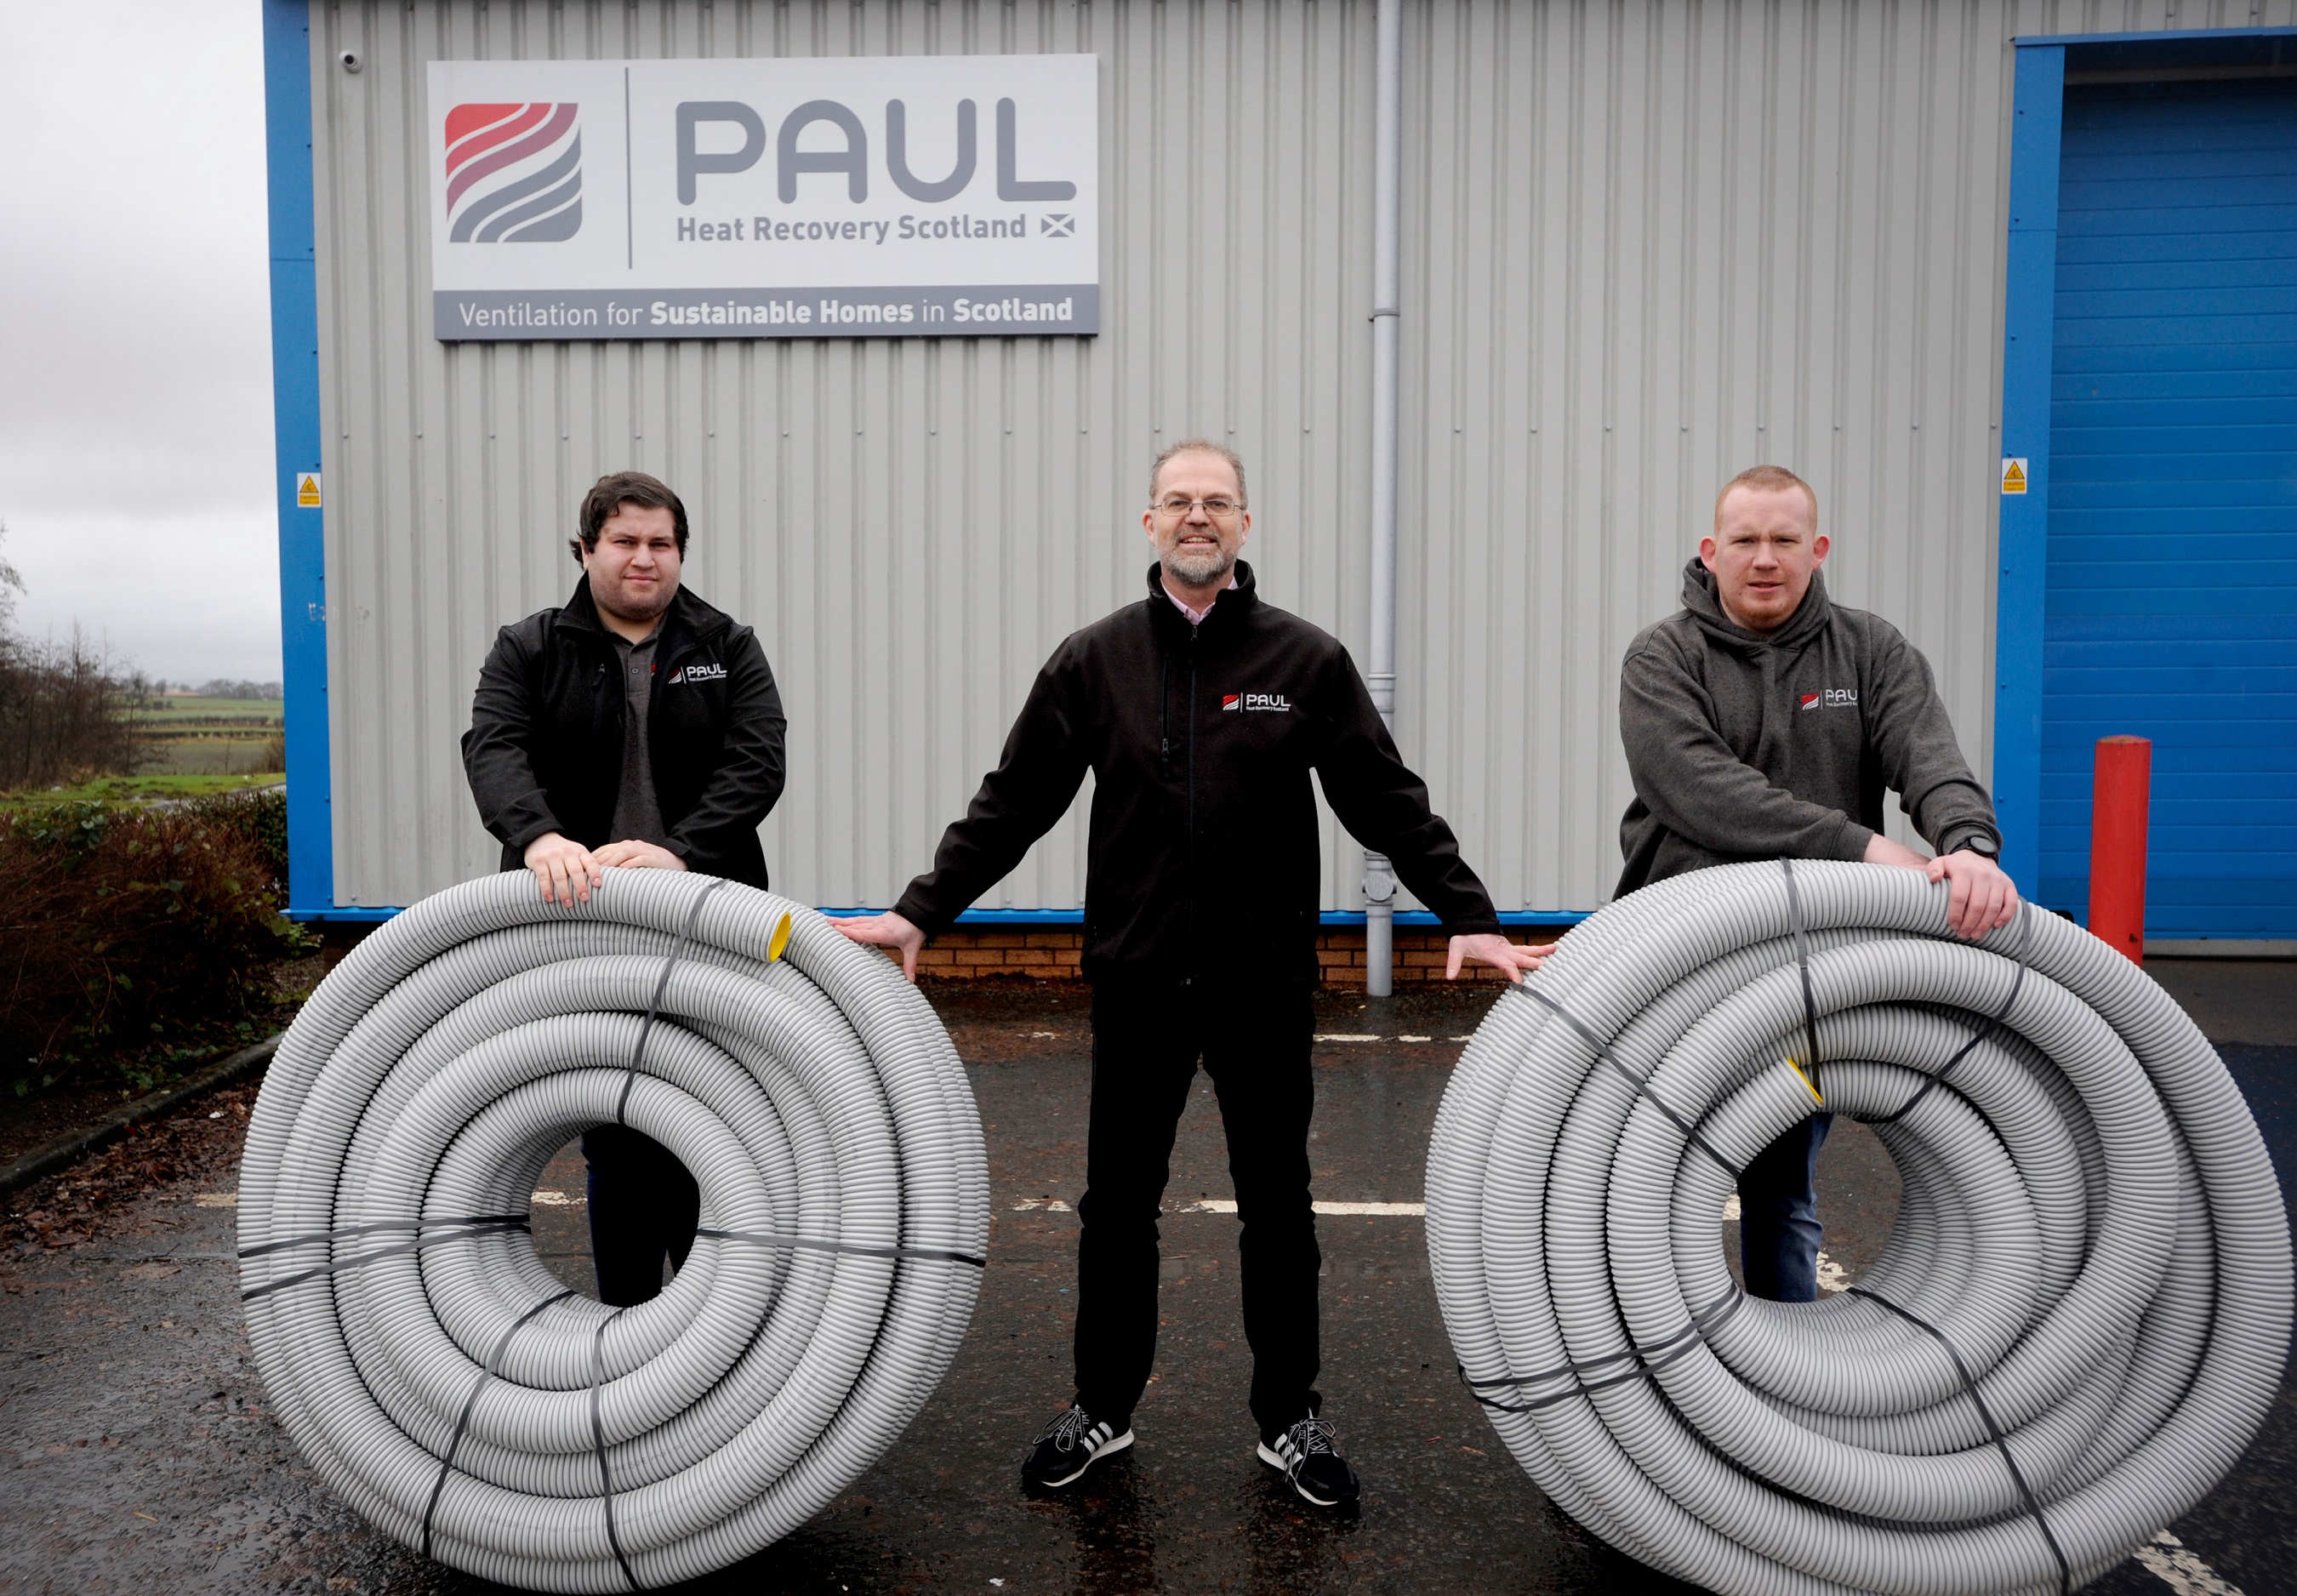 Paul Heat Recovery becomes latest employee-owned business in Scotland